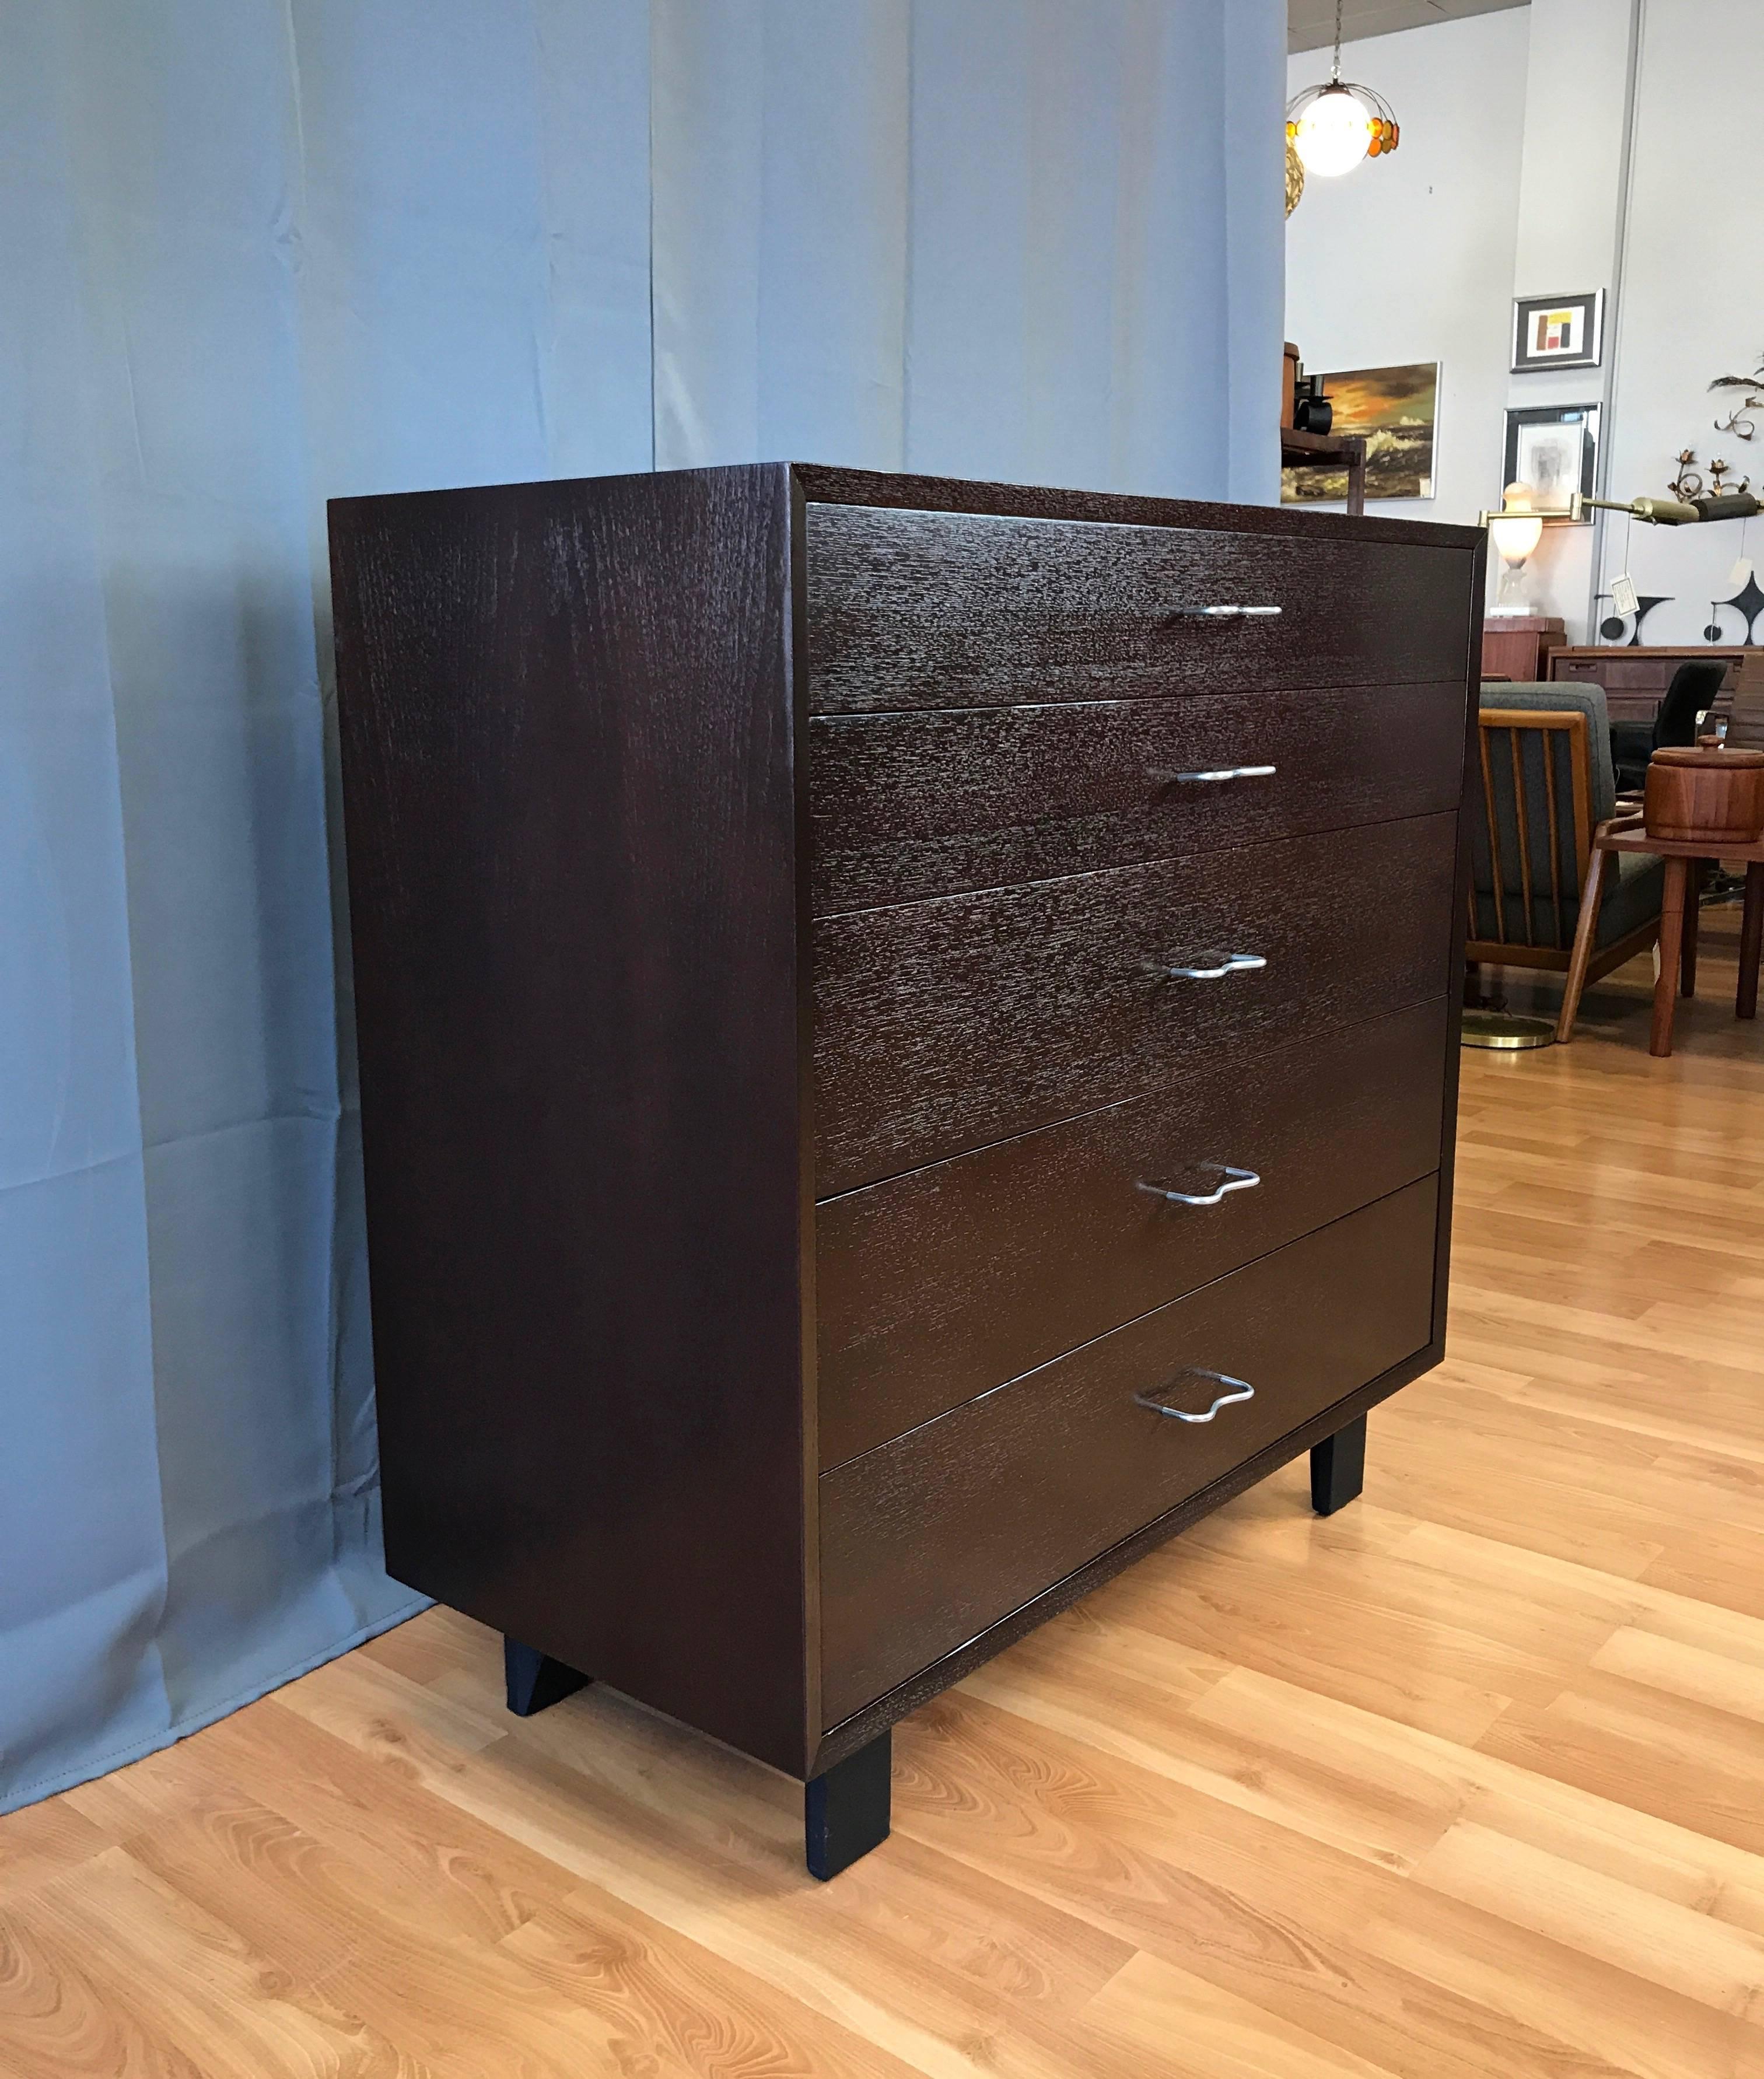 A Mid-Century Modern five-drawer walnut dresser or chest by George Nelson from his “Basic Cabinet Series” for Herman Miller.

Exceptional semi-gloss dark raw umber finish subtly showcases figured grain while retaining a hint of wood texture. Top